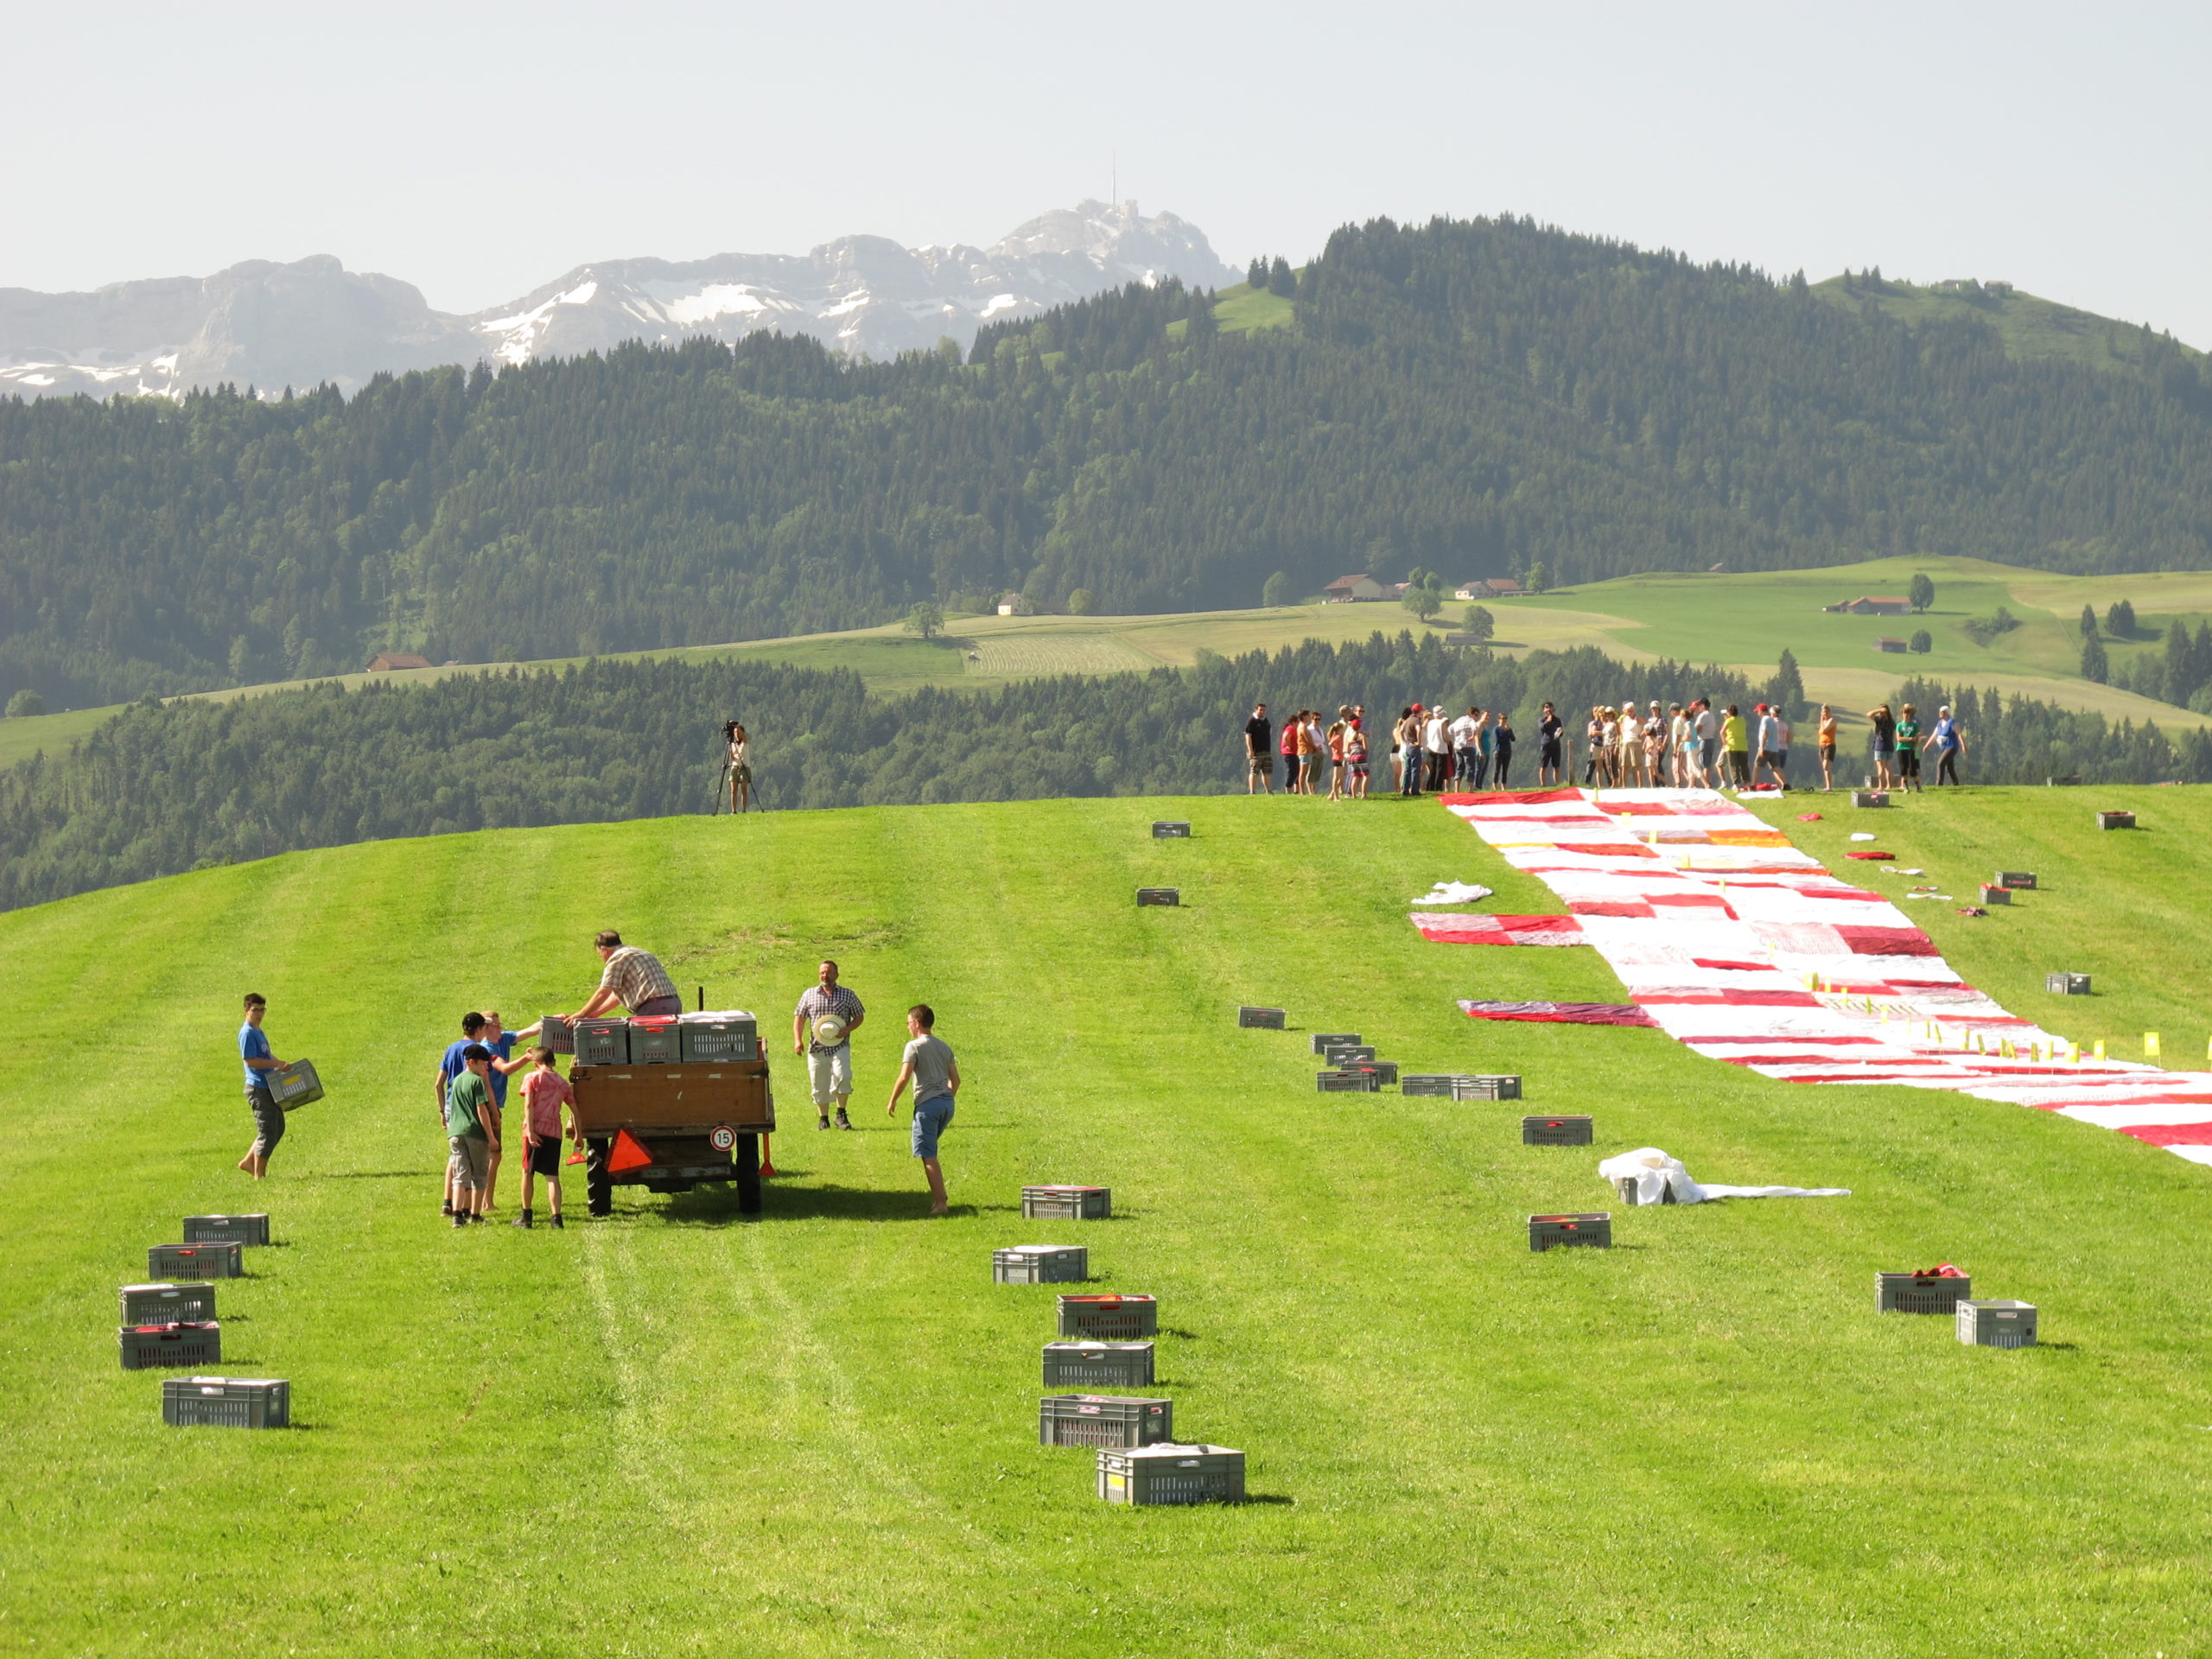 The World’s Biggest Picnic Blanket Is Growing In The Swiss Countryside